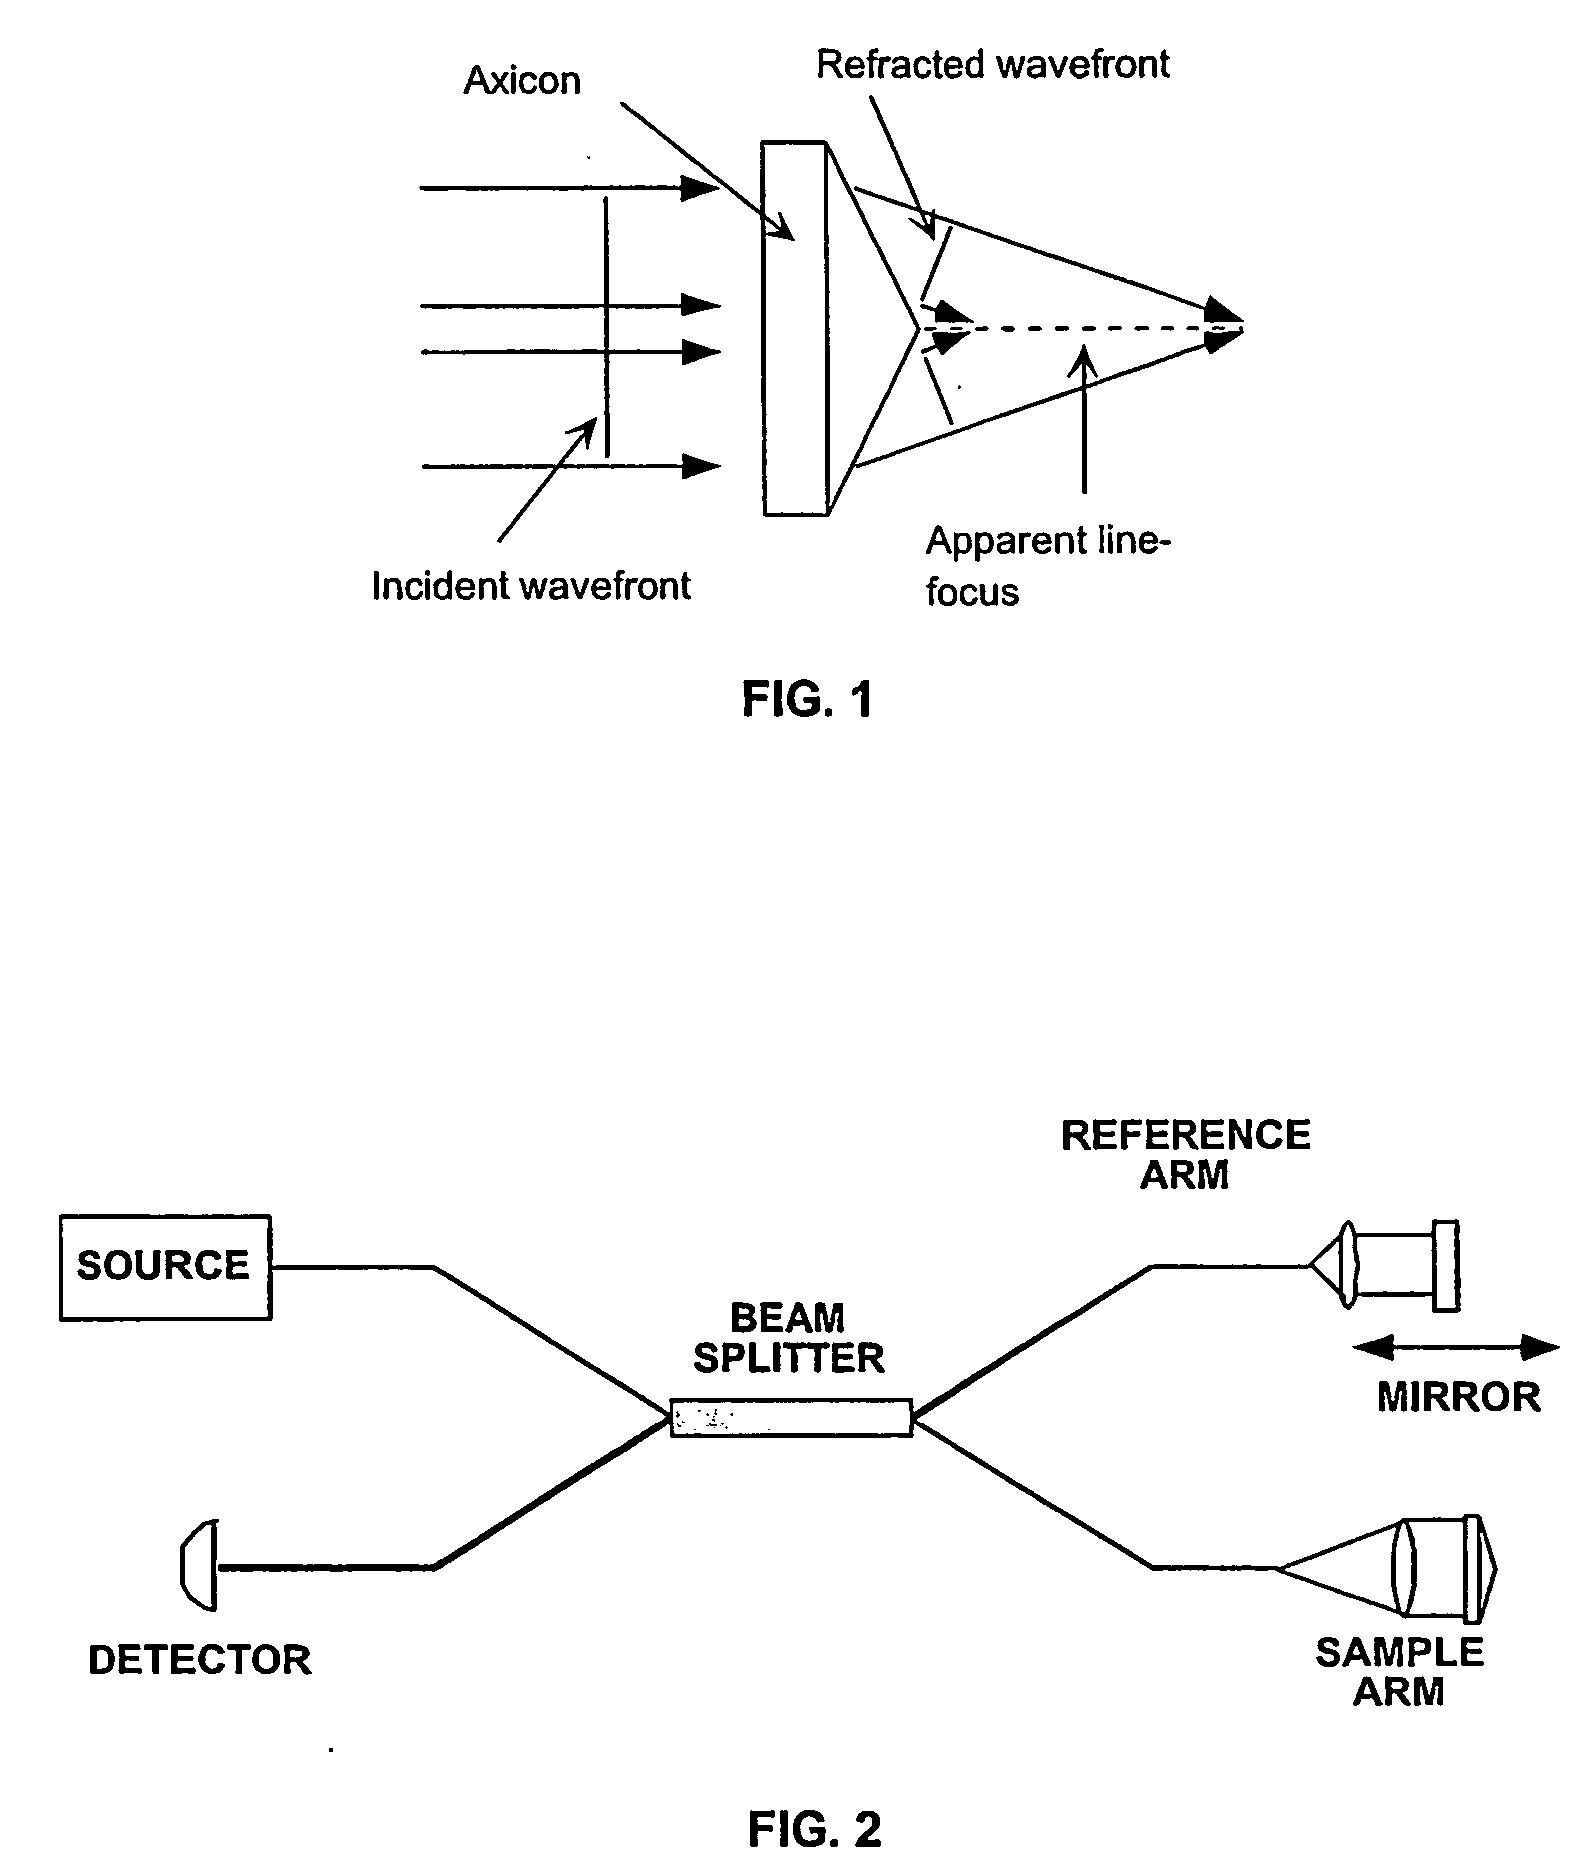 Apparatus for low coherence ranging